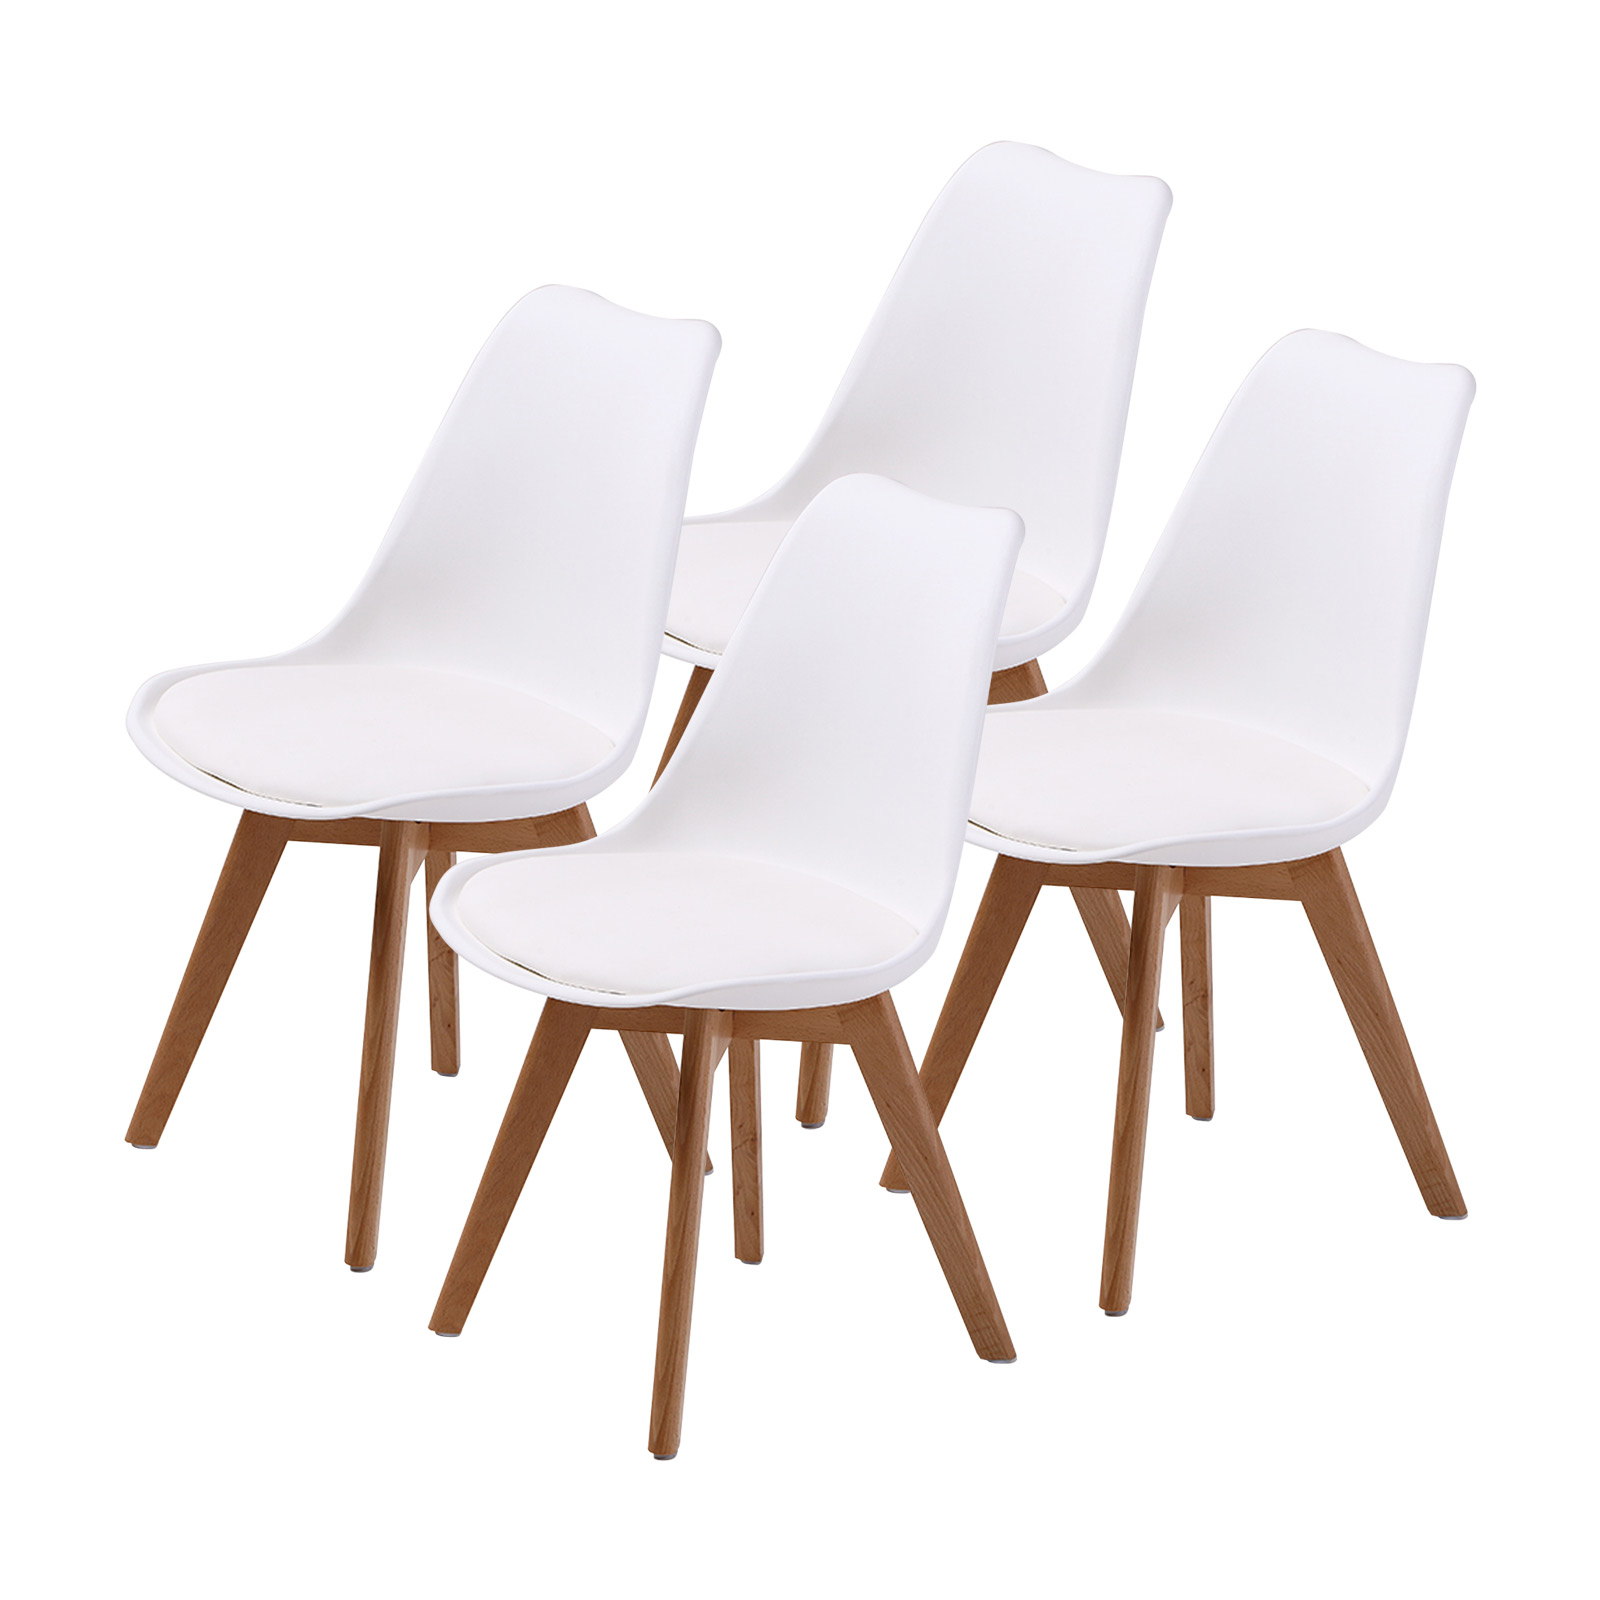 4X Padded Seat Dining Chair - WHITE